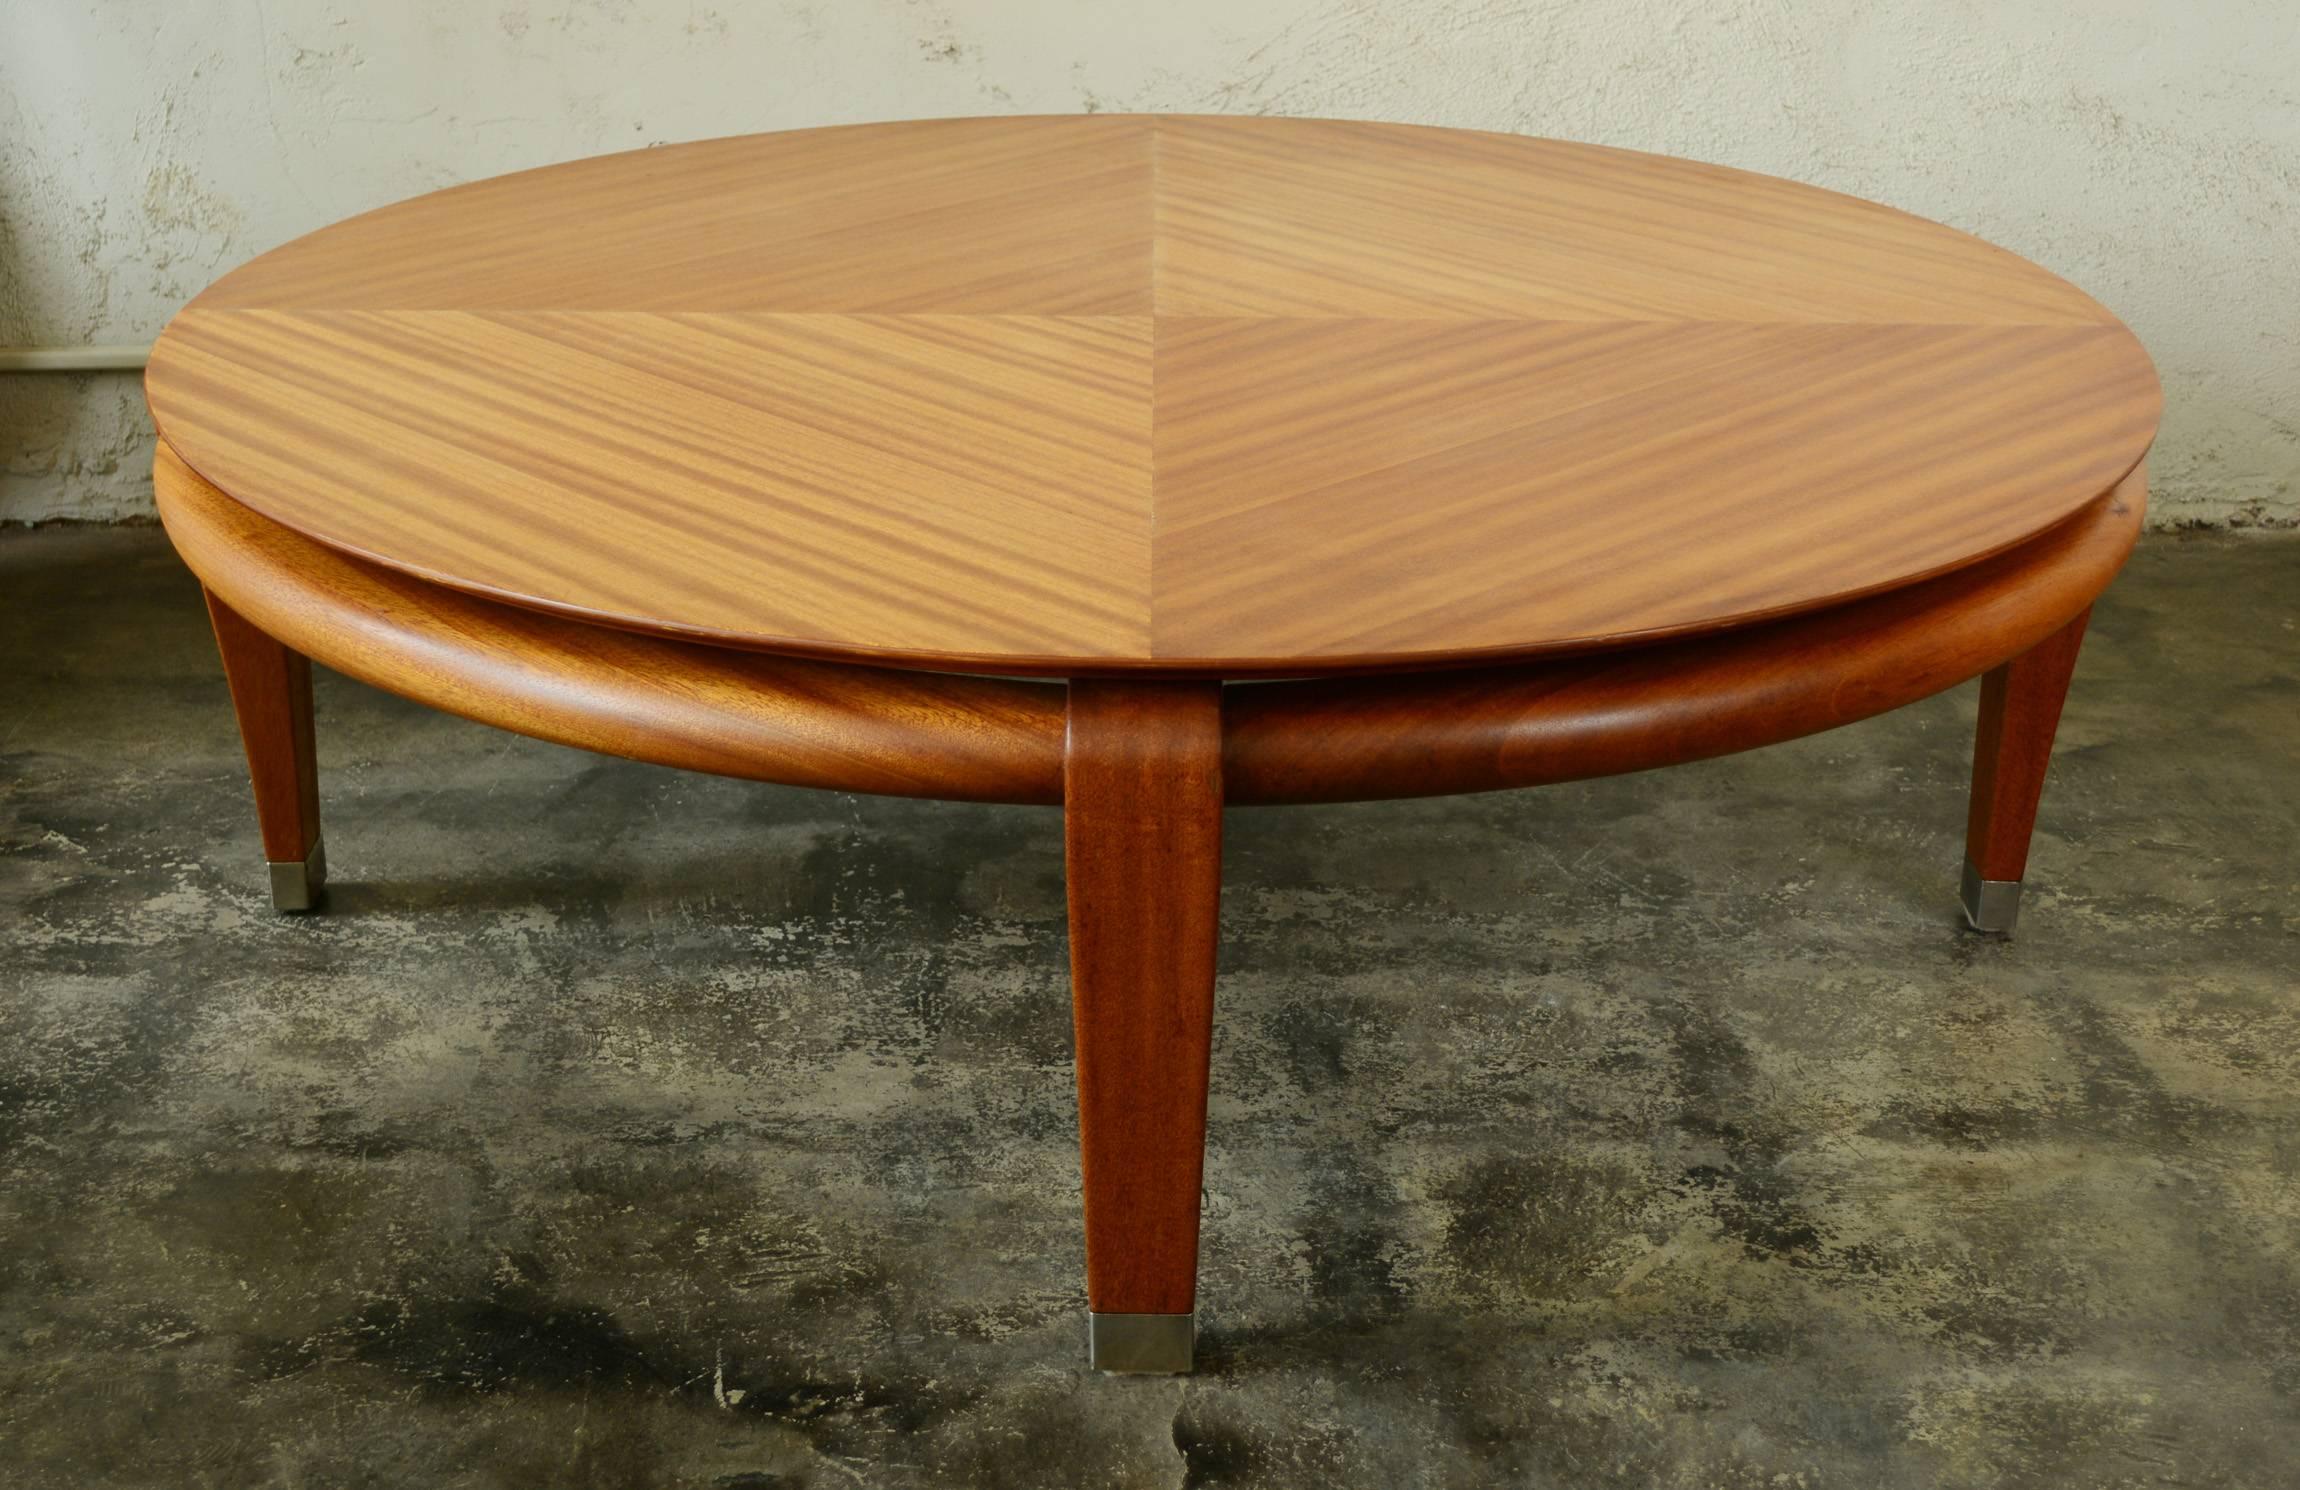 Exquisitely shaped mahogany coffee table designed by Paul Laszlo. The top floats on the base. The legs have nickel plated sabots. The designer utilized the light and dark bands of the mahogany to create a visually attractive pattern on the top. This